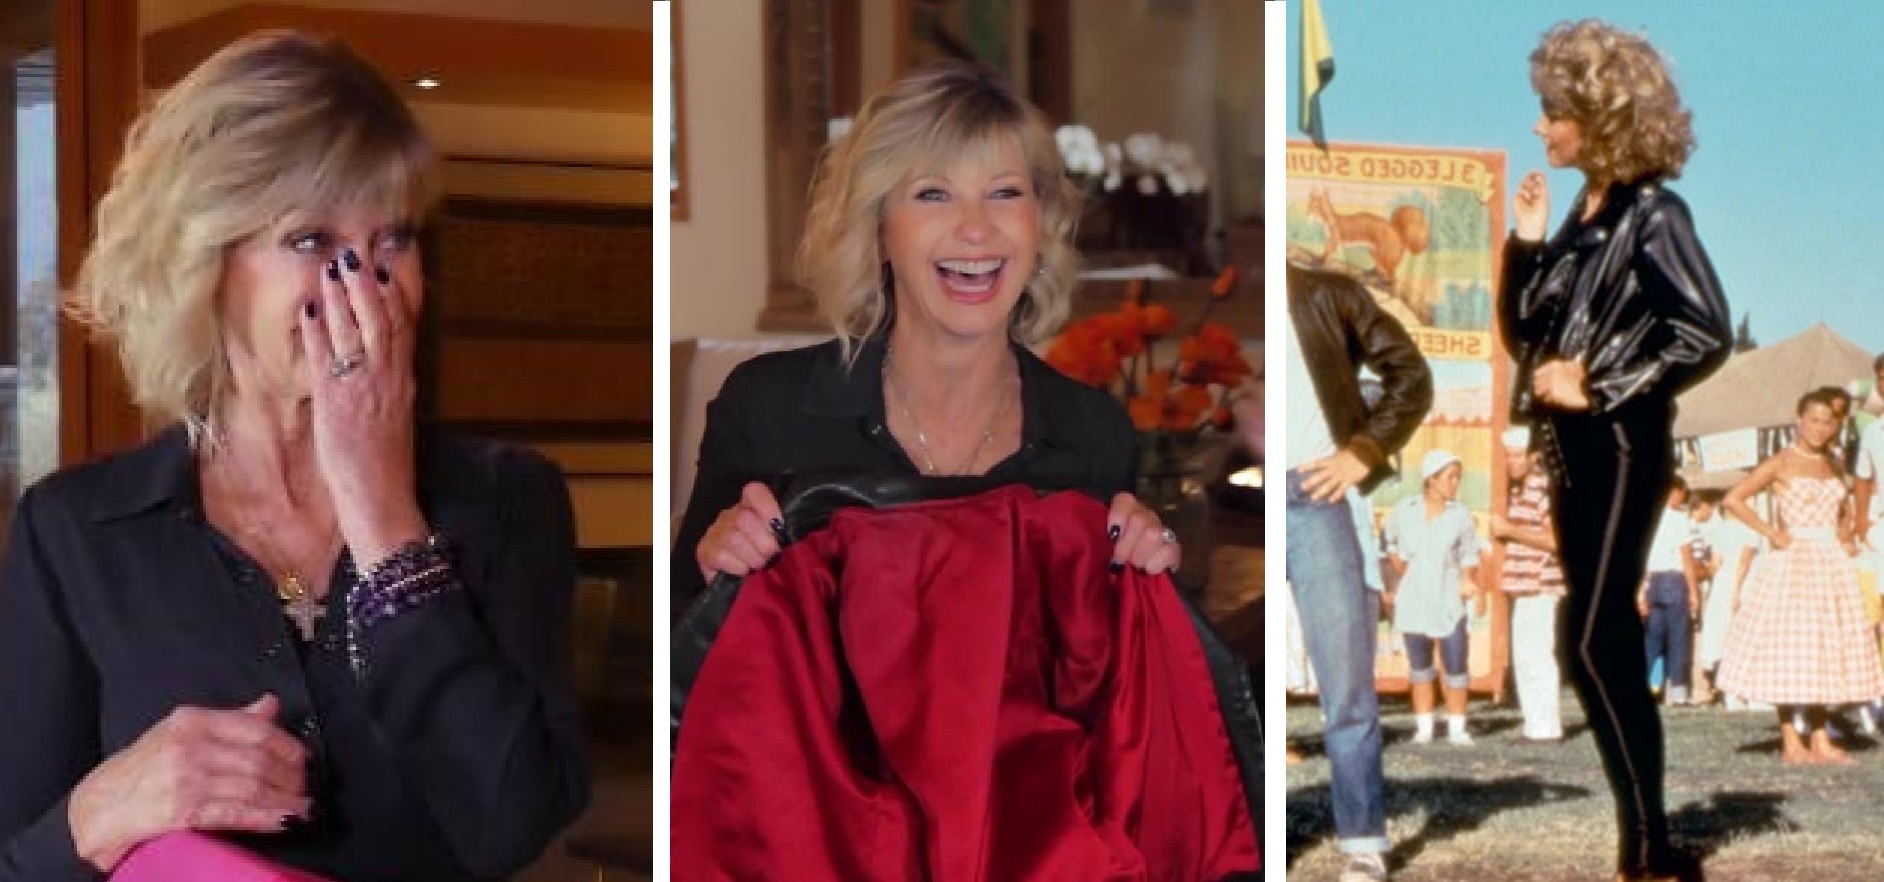 Watch: Fan Moves Olivia Newton-John To Tears After Returning Iconic Jacket He Bought at Auction For $243k